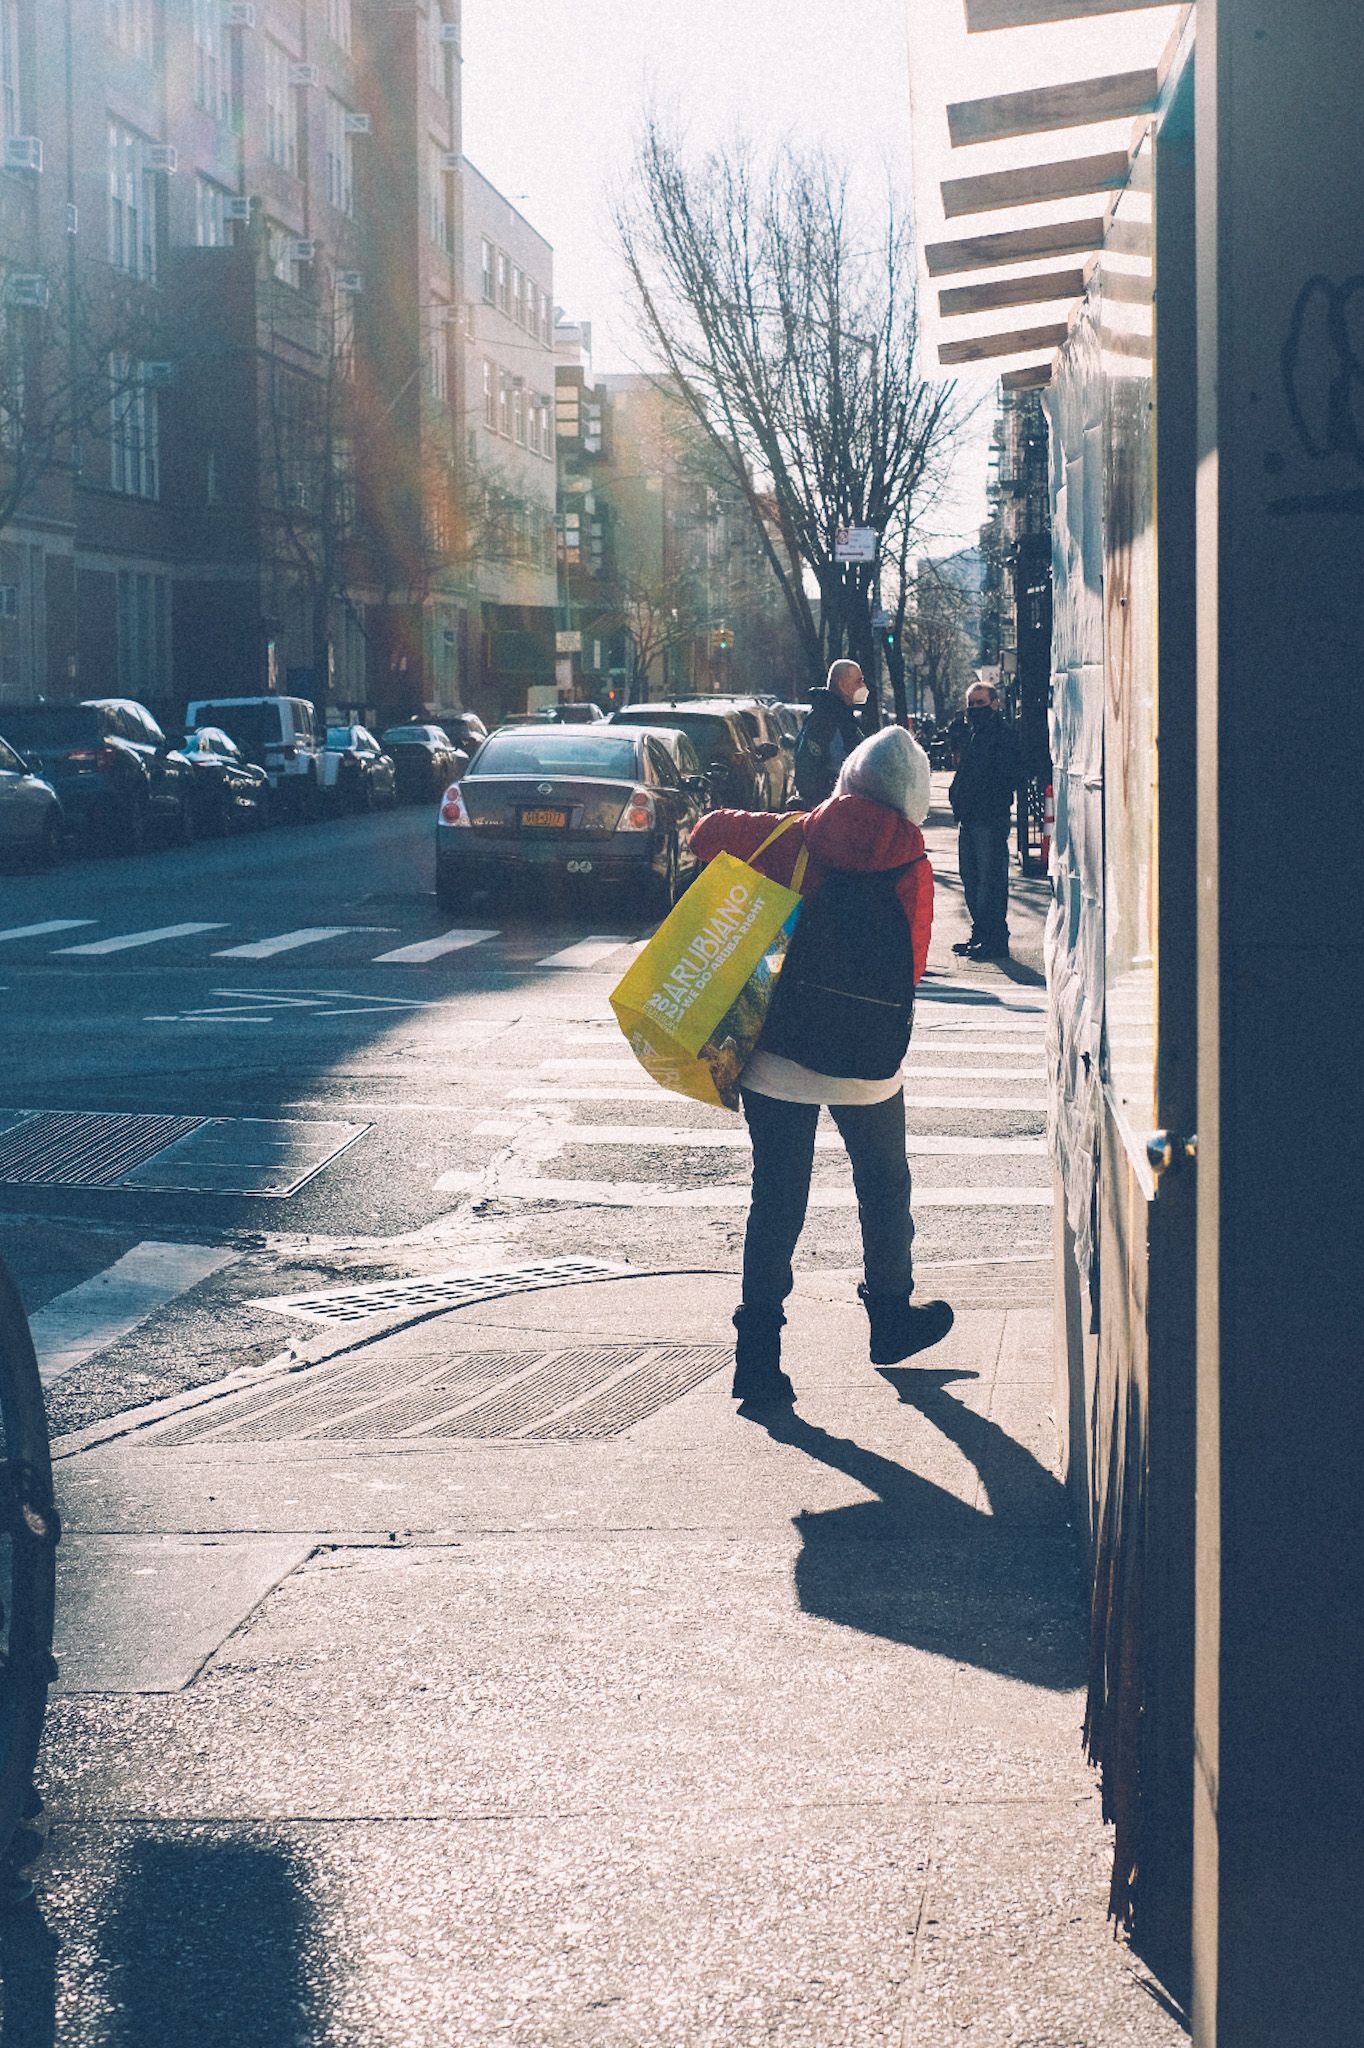 A woman carries a grocery tote down the street in the morning light, two men standing in the background looking.